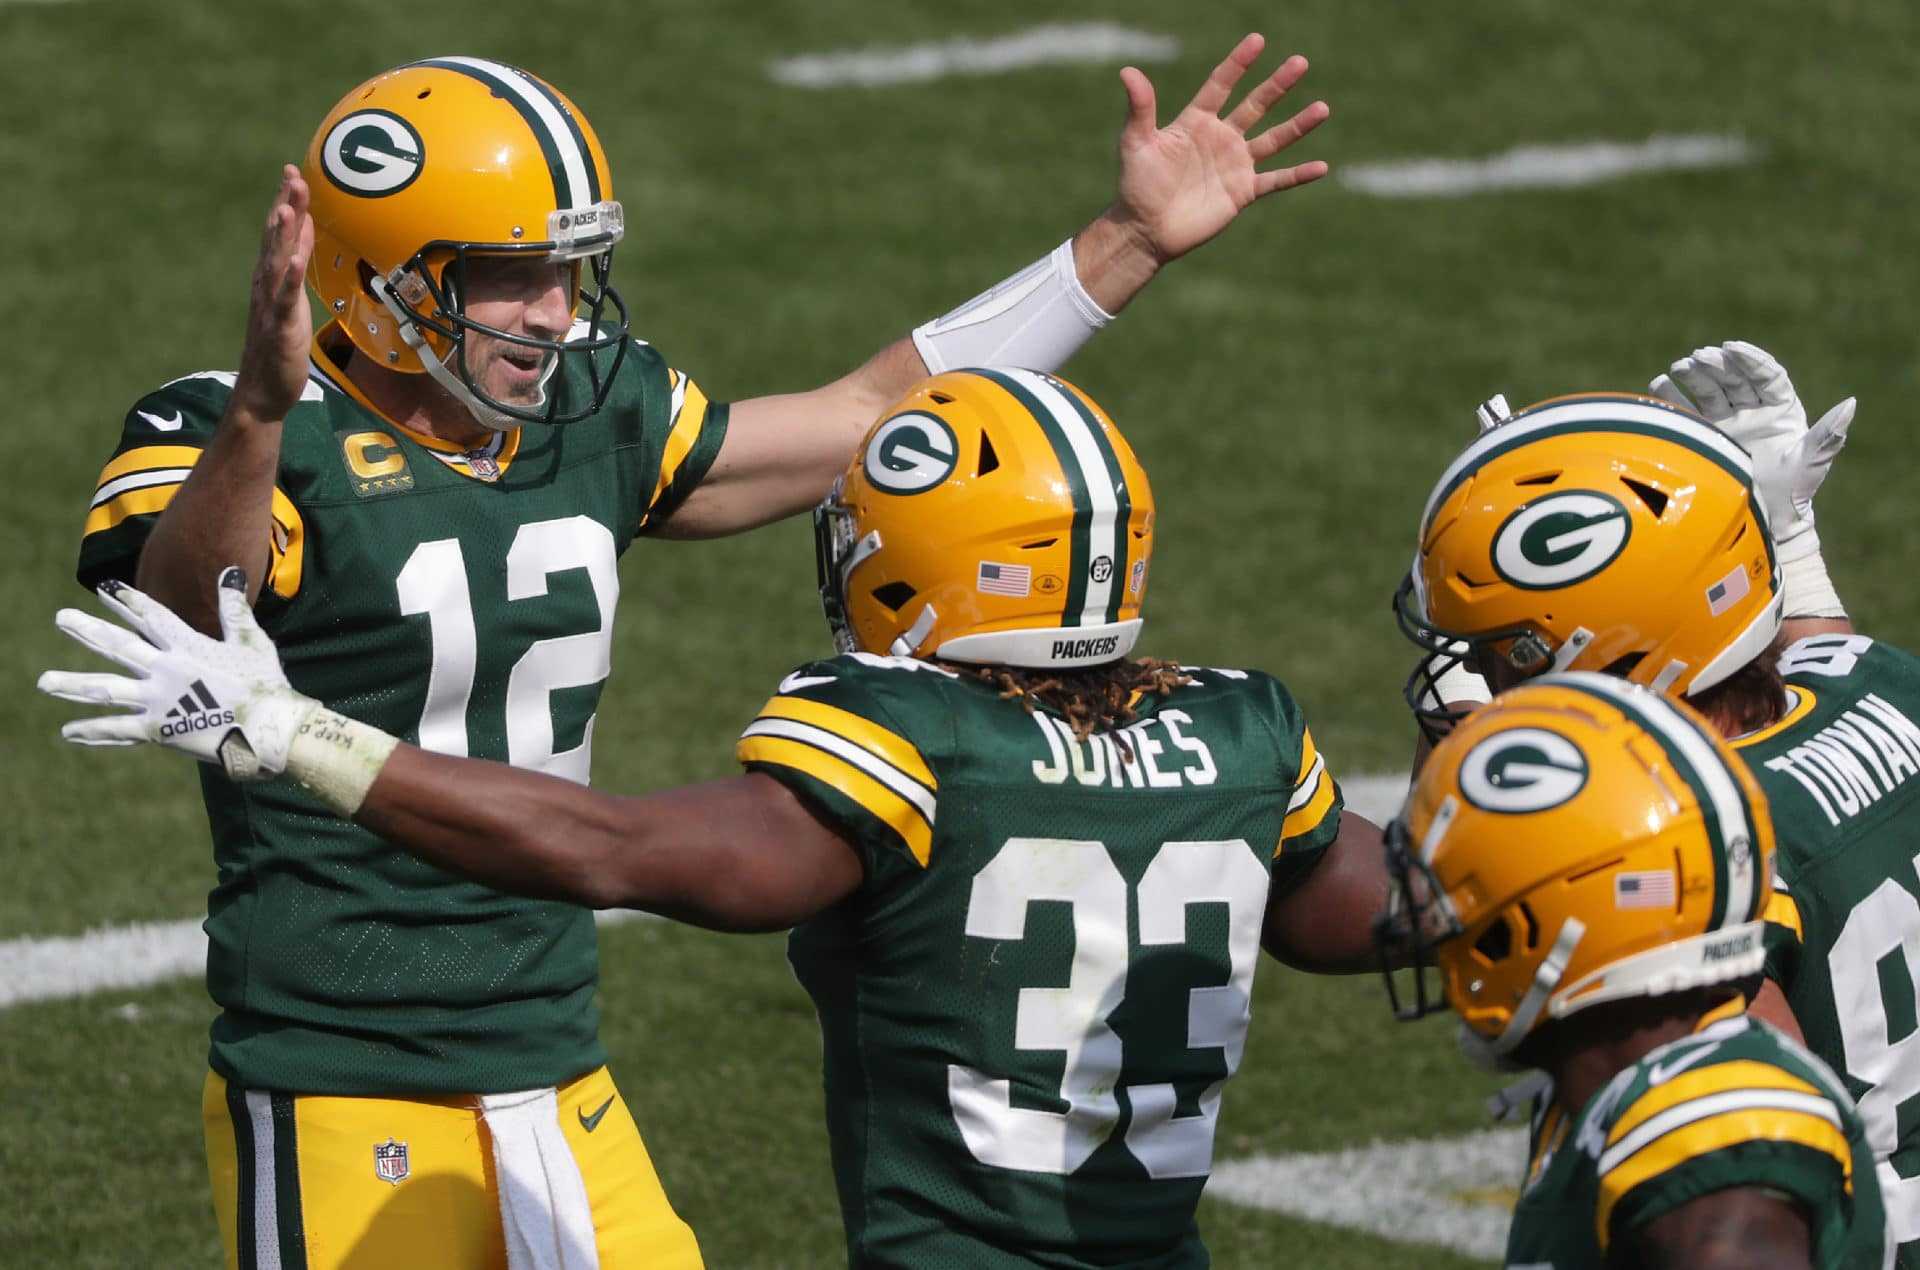 Bold Prediction #1: Aaron Rodgers Finishes with 400+ yards and Four Touchdowns